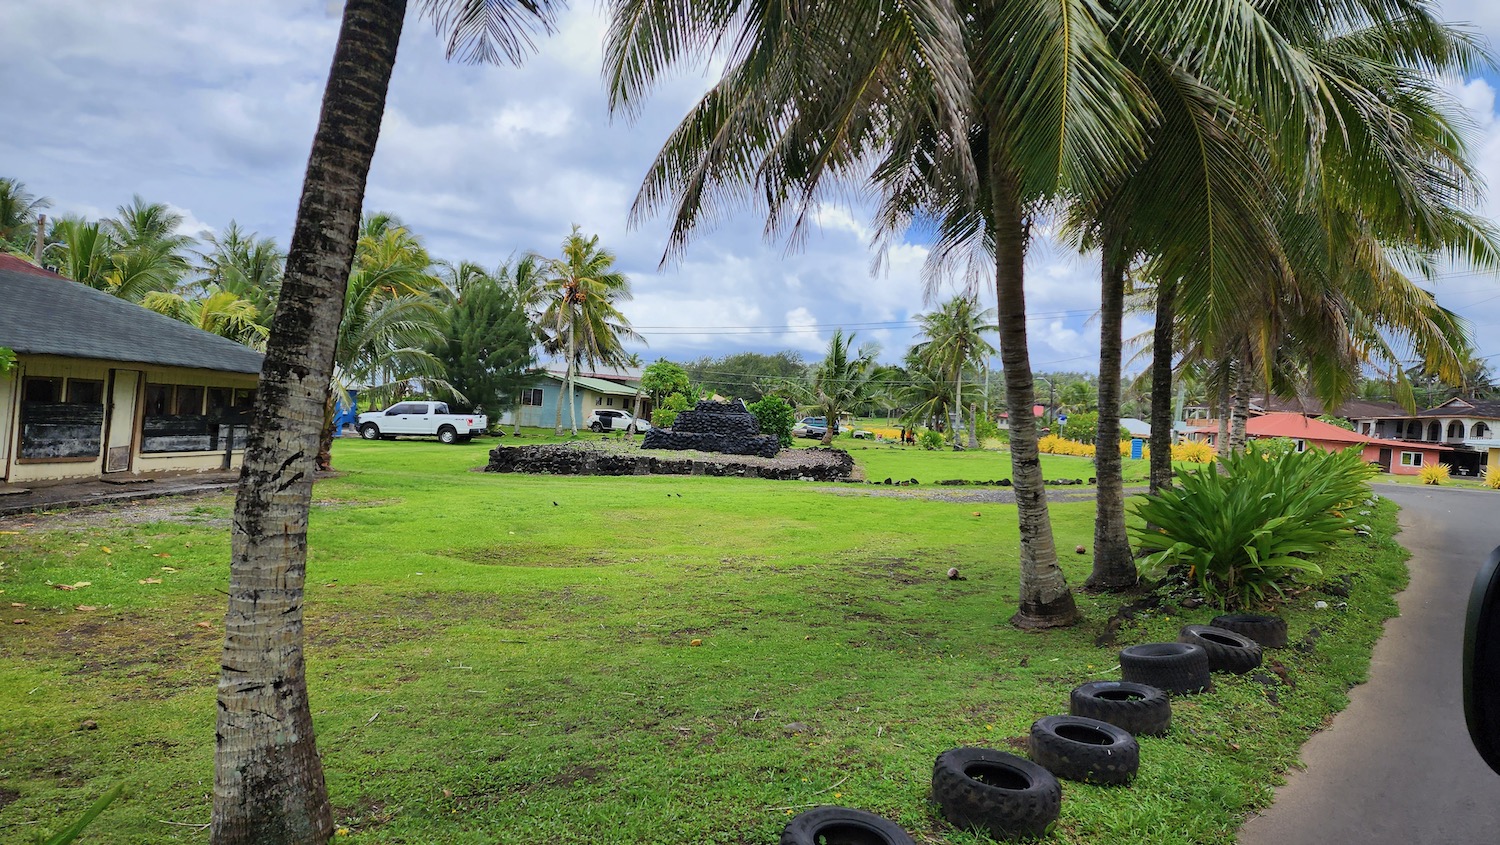 a grass field with trees and tires